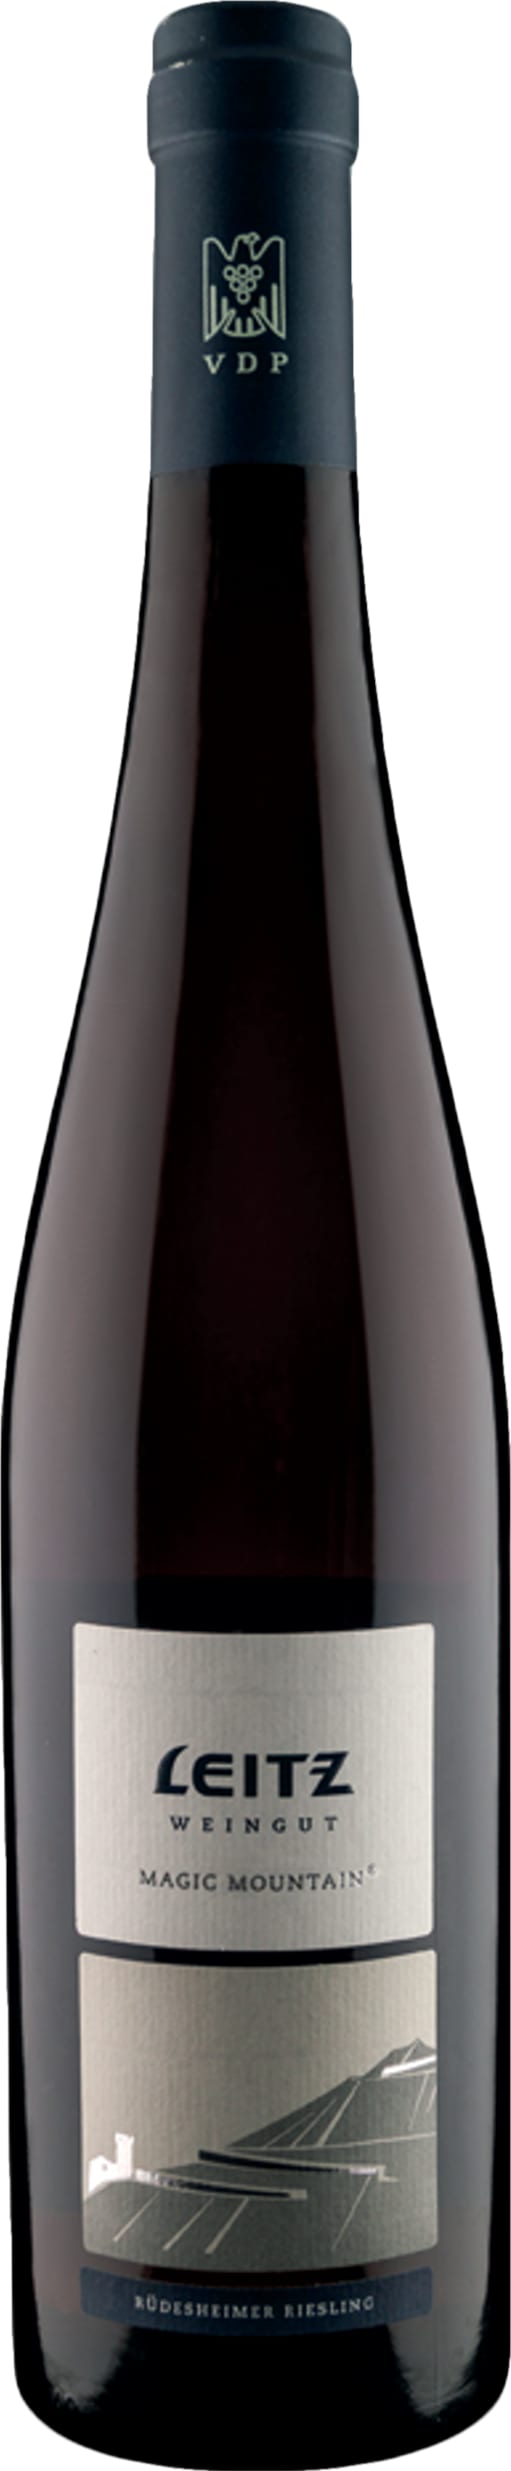 Weingut Leitz Magic Mountain Riesling (Dry), Rheingau 2022 75cl - Buy Weingut Leitz Wines from GREAT WINES DIRECT wine shop